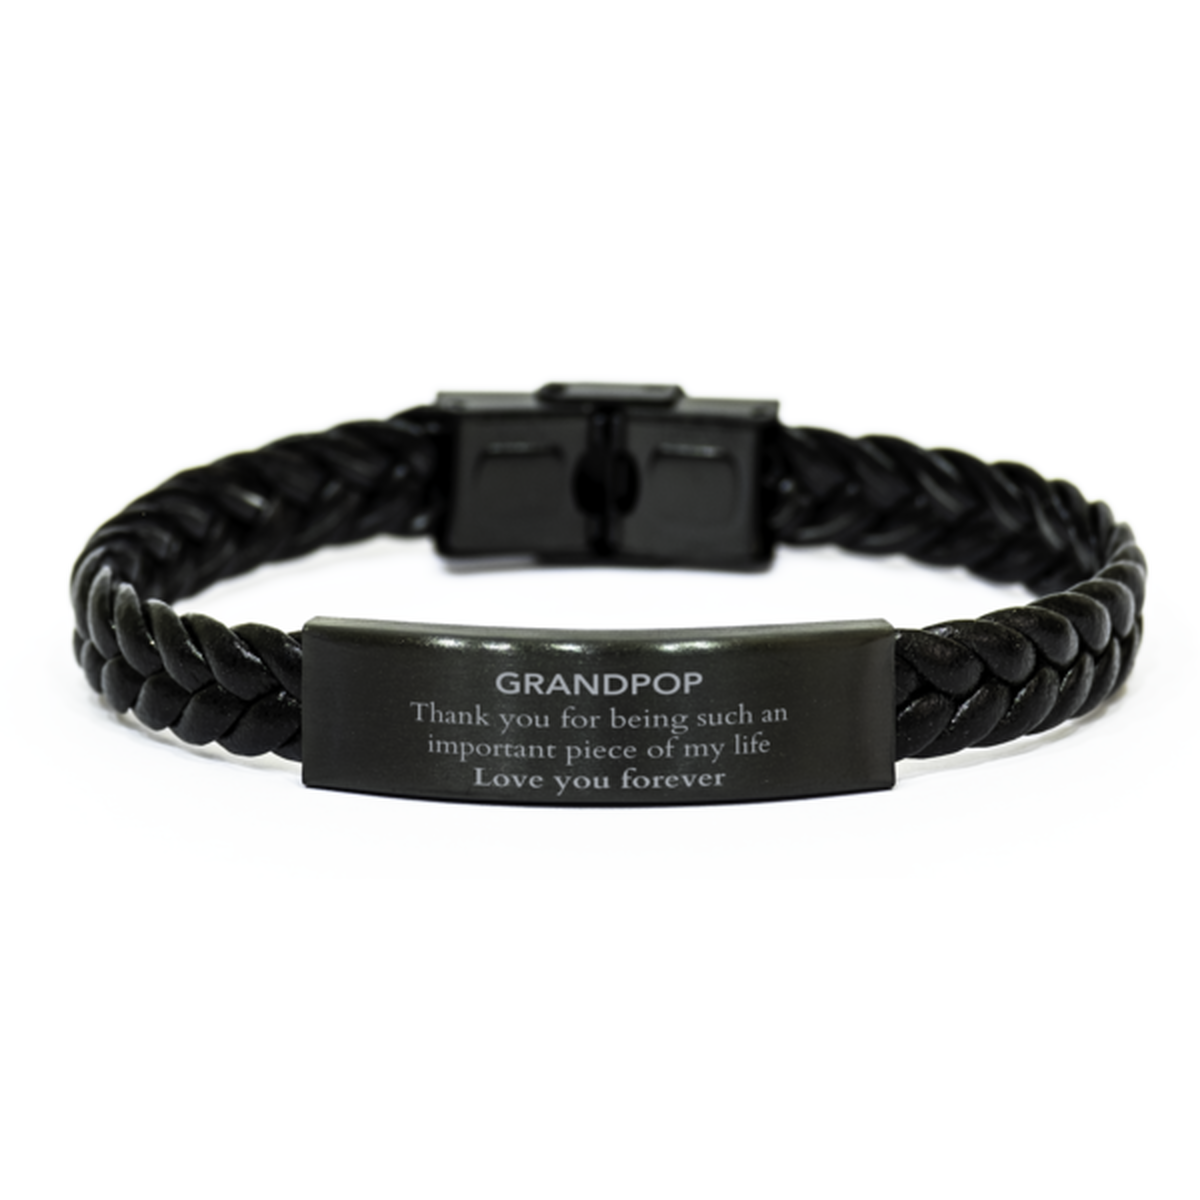 Appropriate Grandpop Braided Leather Bracelet Epic Birthday Gifts for Grandpop Thank you for being such an important piece of my life Grandpop Christmas Mothers Fathers Day